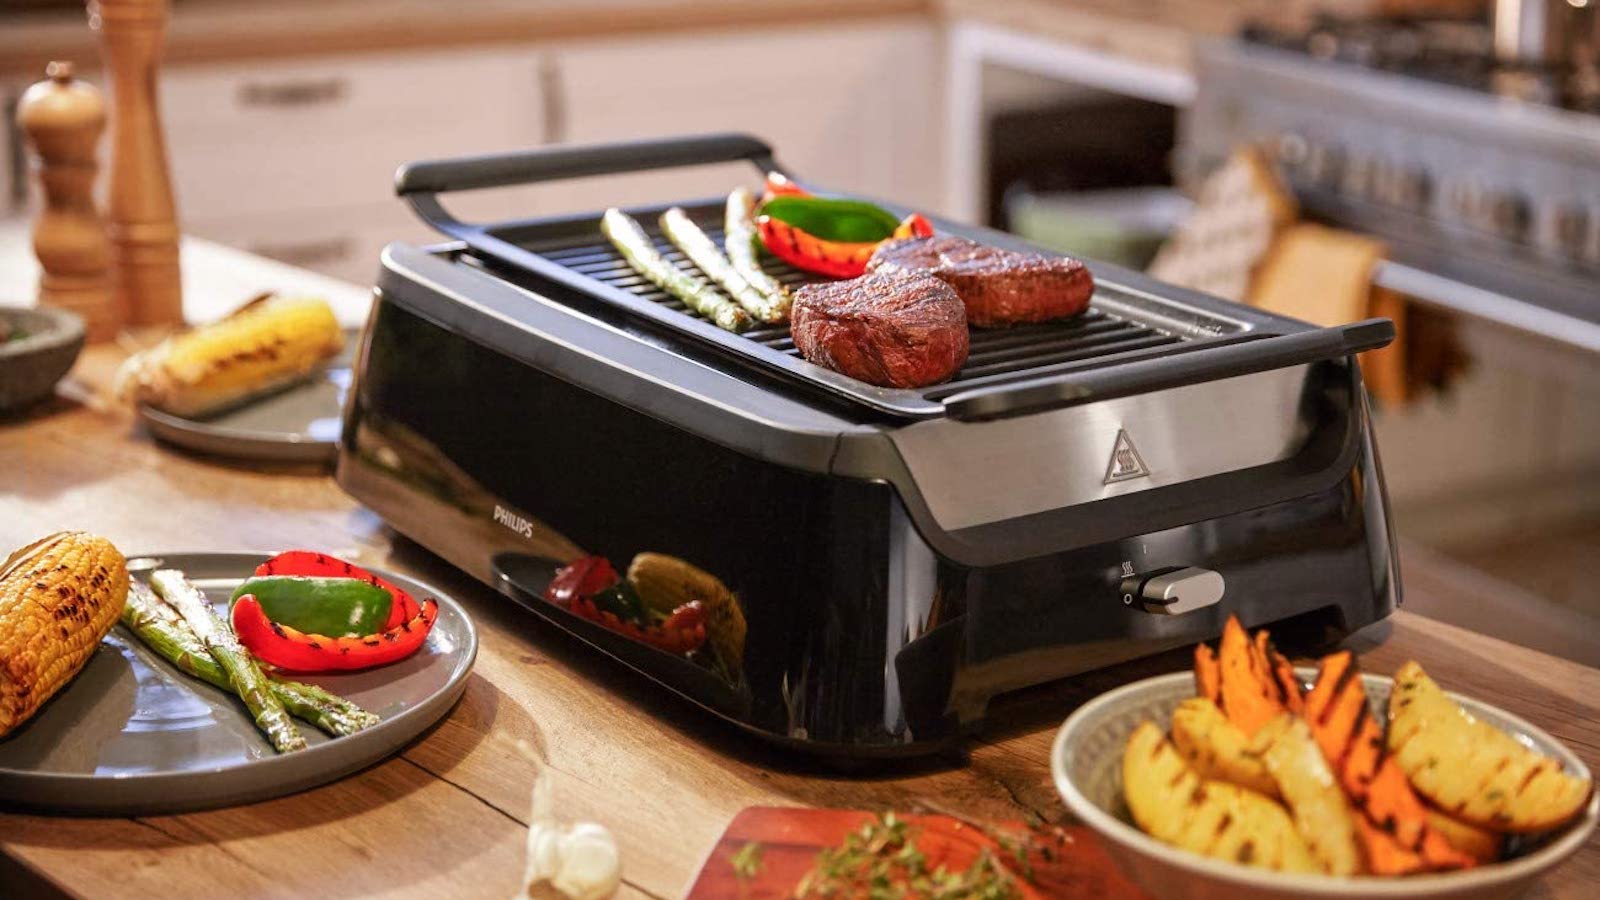 https://thegadgetflow.com/wp-content/uploads/2016/07/Philips-Smoke-less-Grill-with-Rotisserie-Attachment-01.jpg